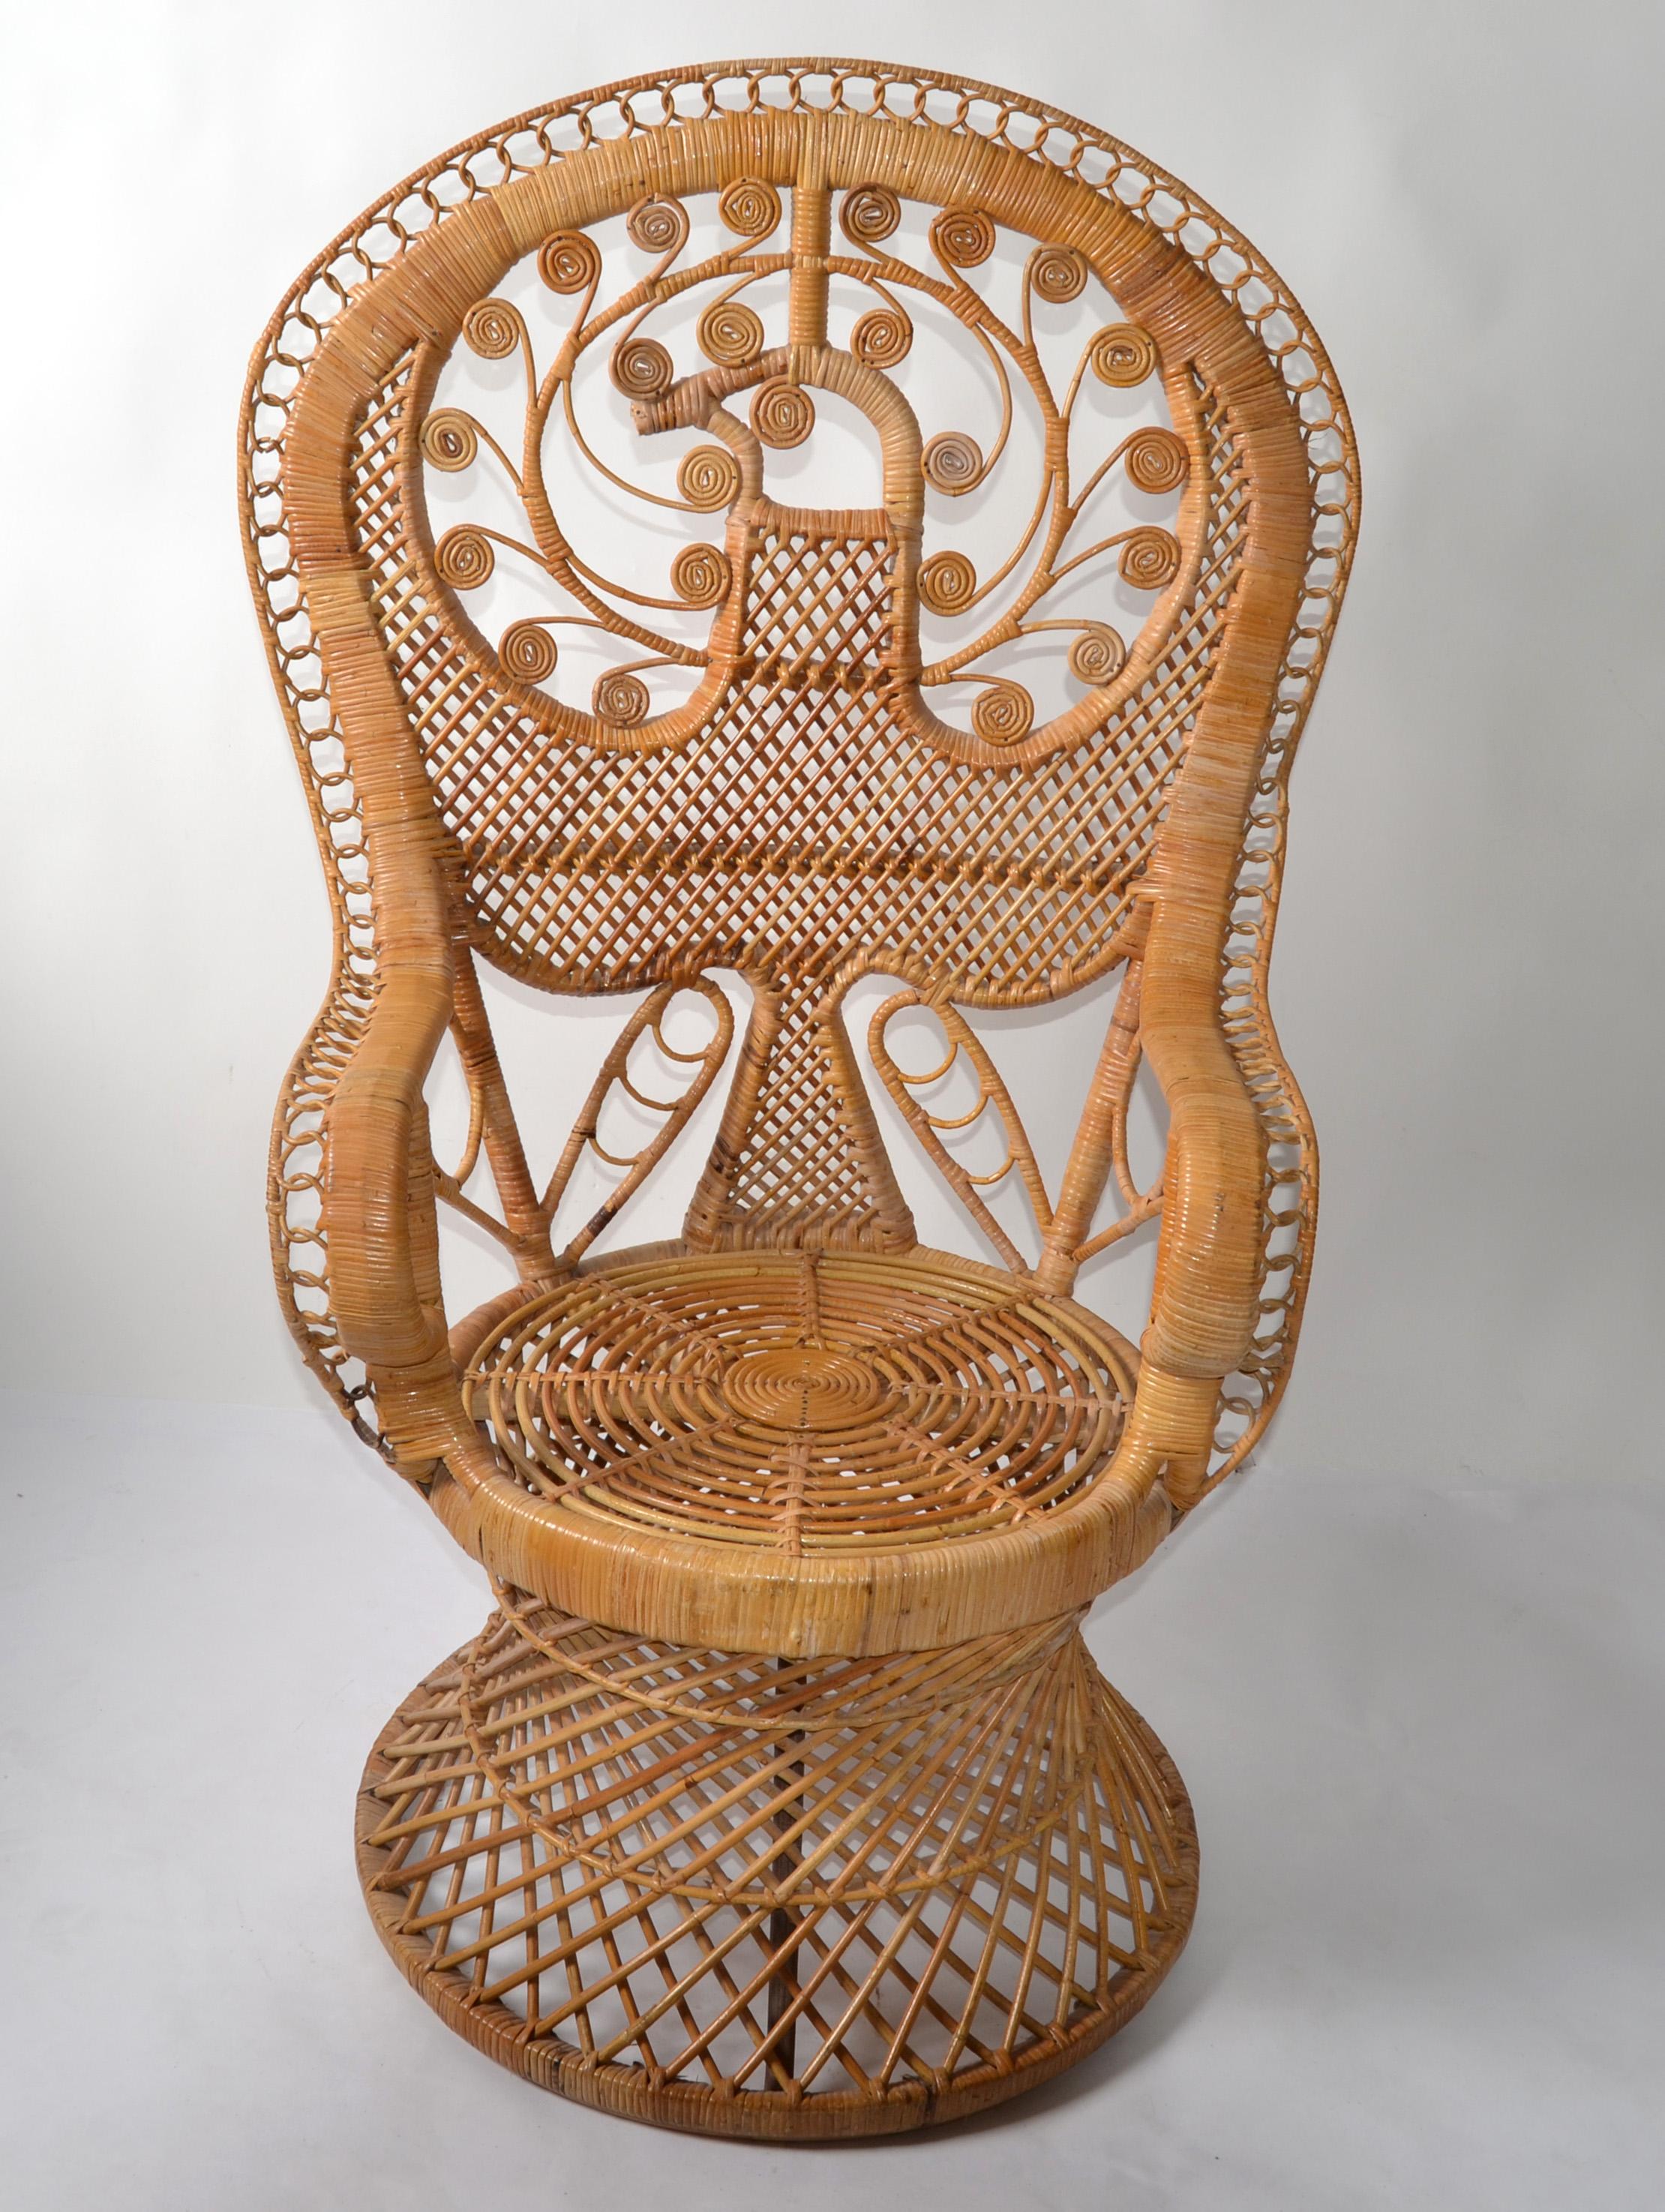 Chinese Chippendale Coastal Vintage Round Rattan Accent Table Hand-Woven Wicker Caning Peacock Chair For Sale